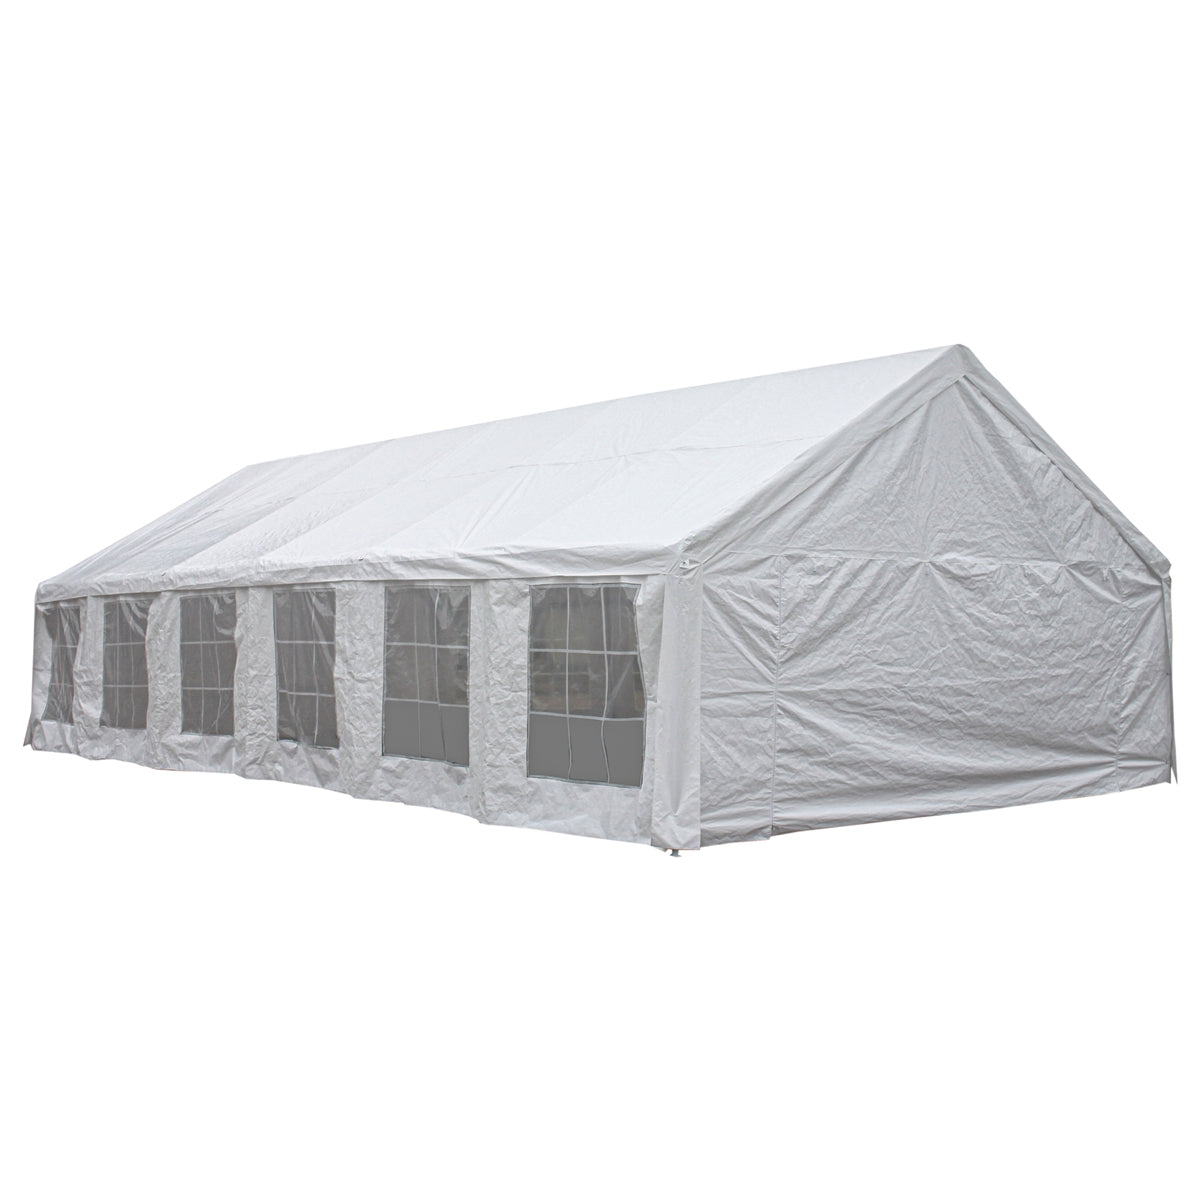 Aleko Heavy Duty Outdoor Canopy Event Tent with Windows - 20 X 40 FT - PWT20X40-AP